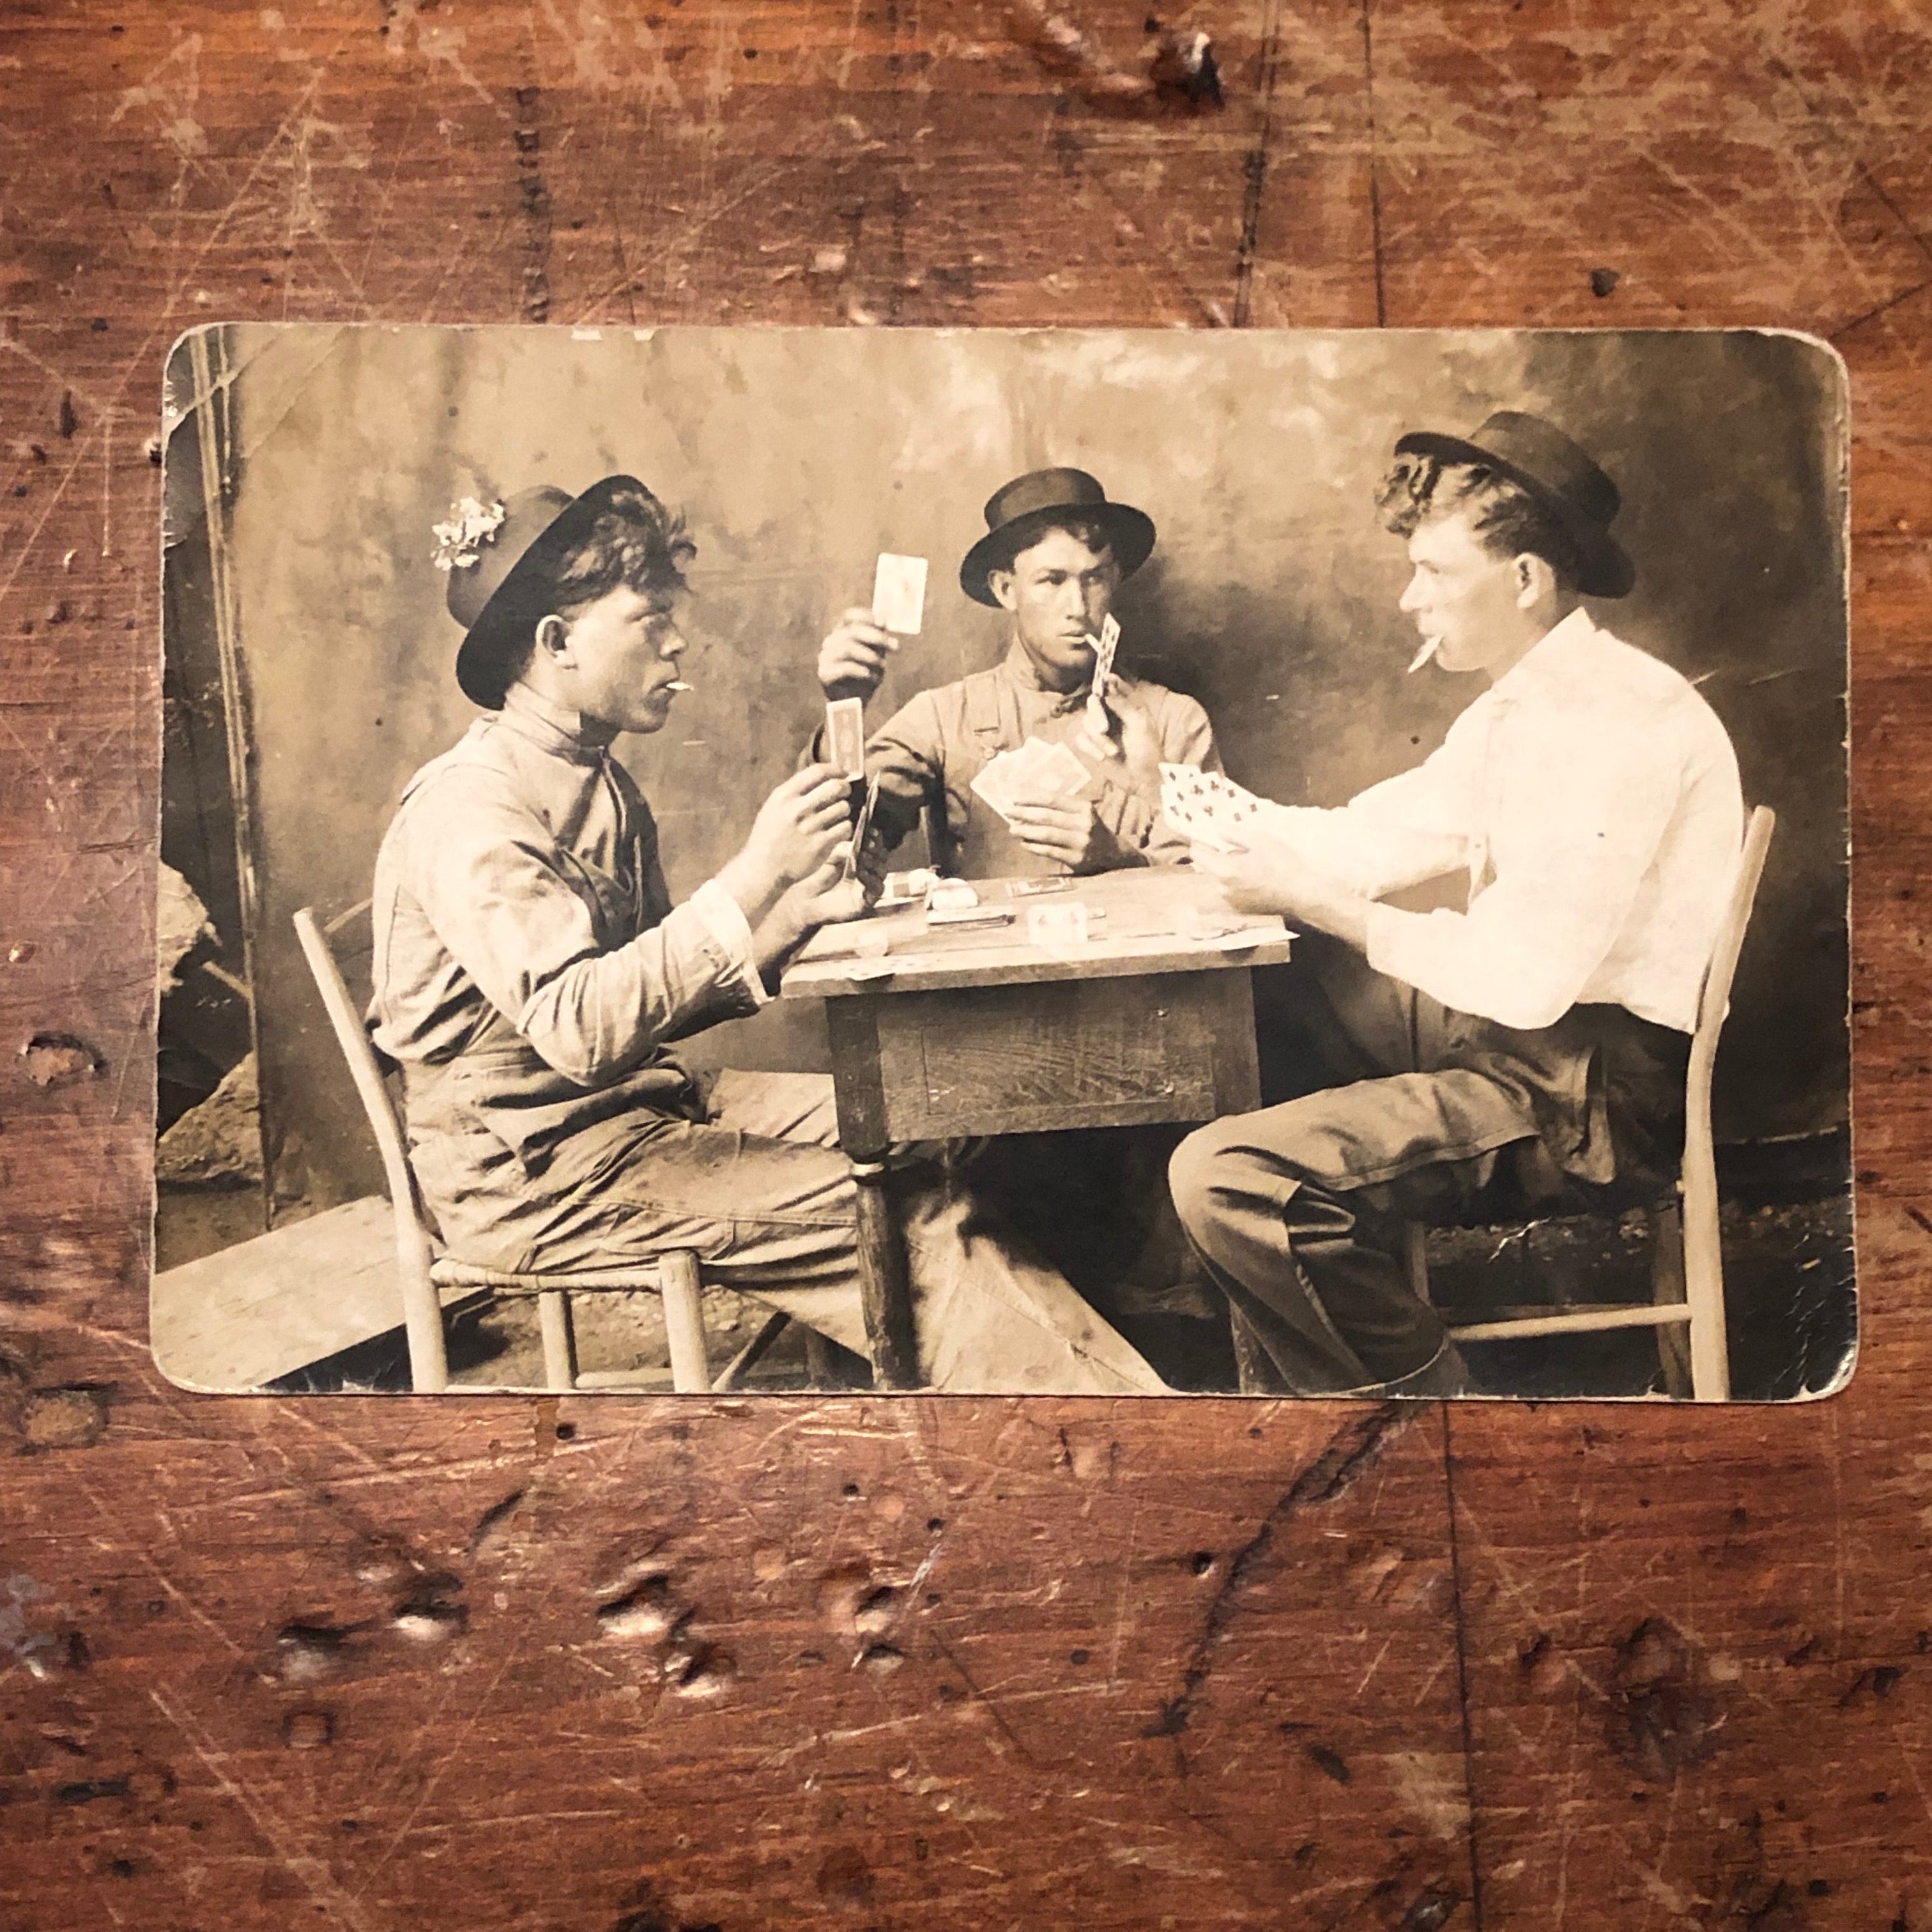 Antique RPPC of Gambling Card Game - Rare Real Photo Postcard from Early 1900s - Unusual Photo of Men's Workwear - Mancave Photography